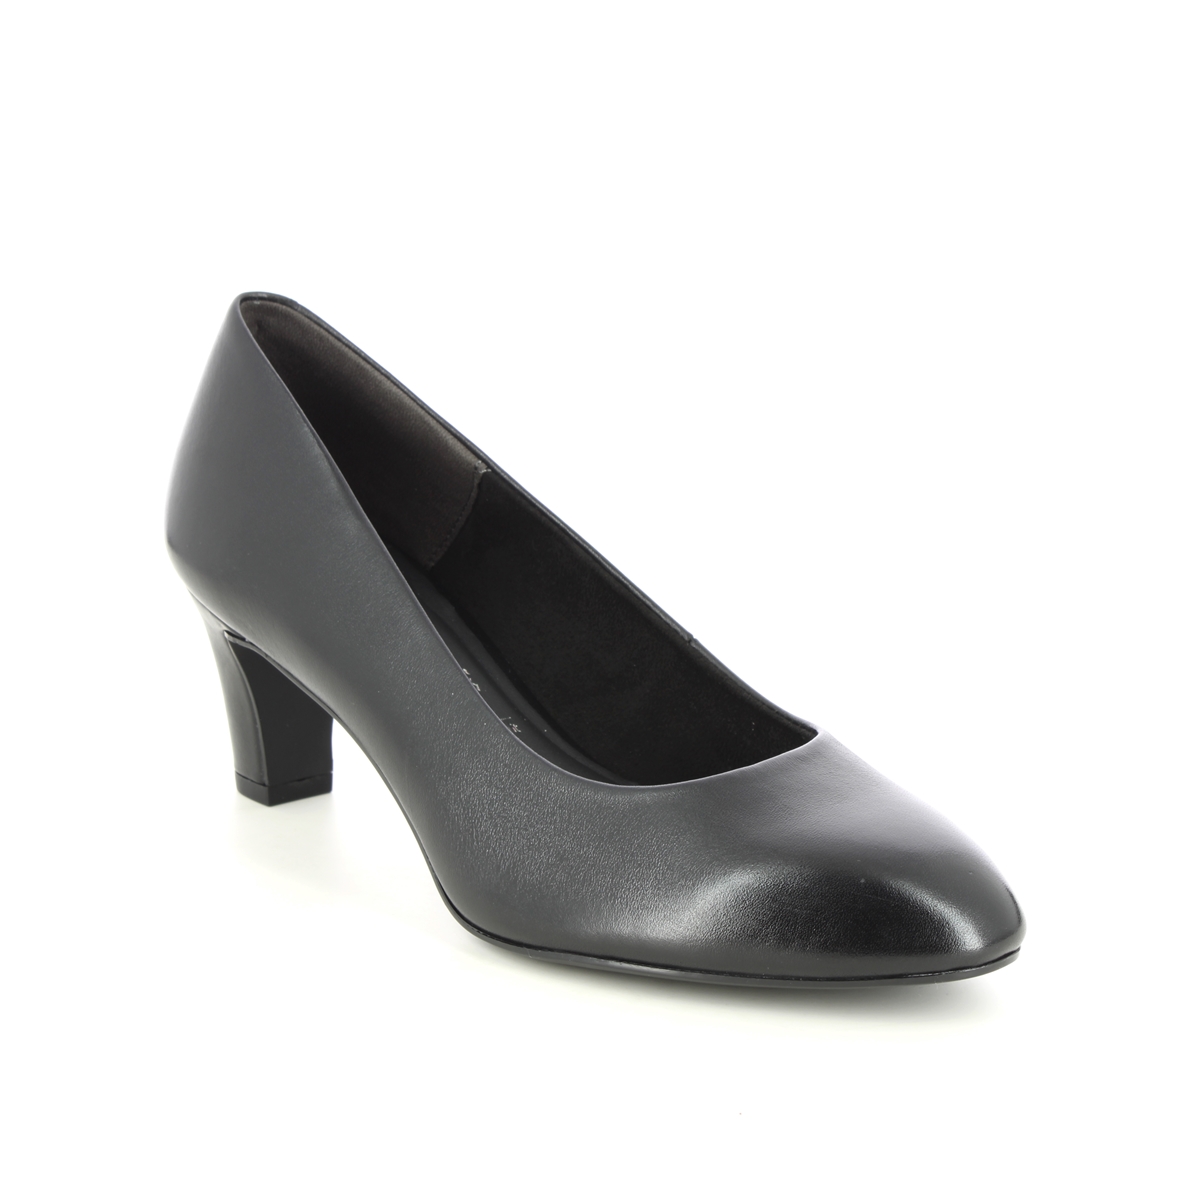 Tamaris Daenerys Black leather Womens Court Shoes 22420-42-001 in a Plain Leather in Size 37